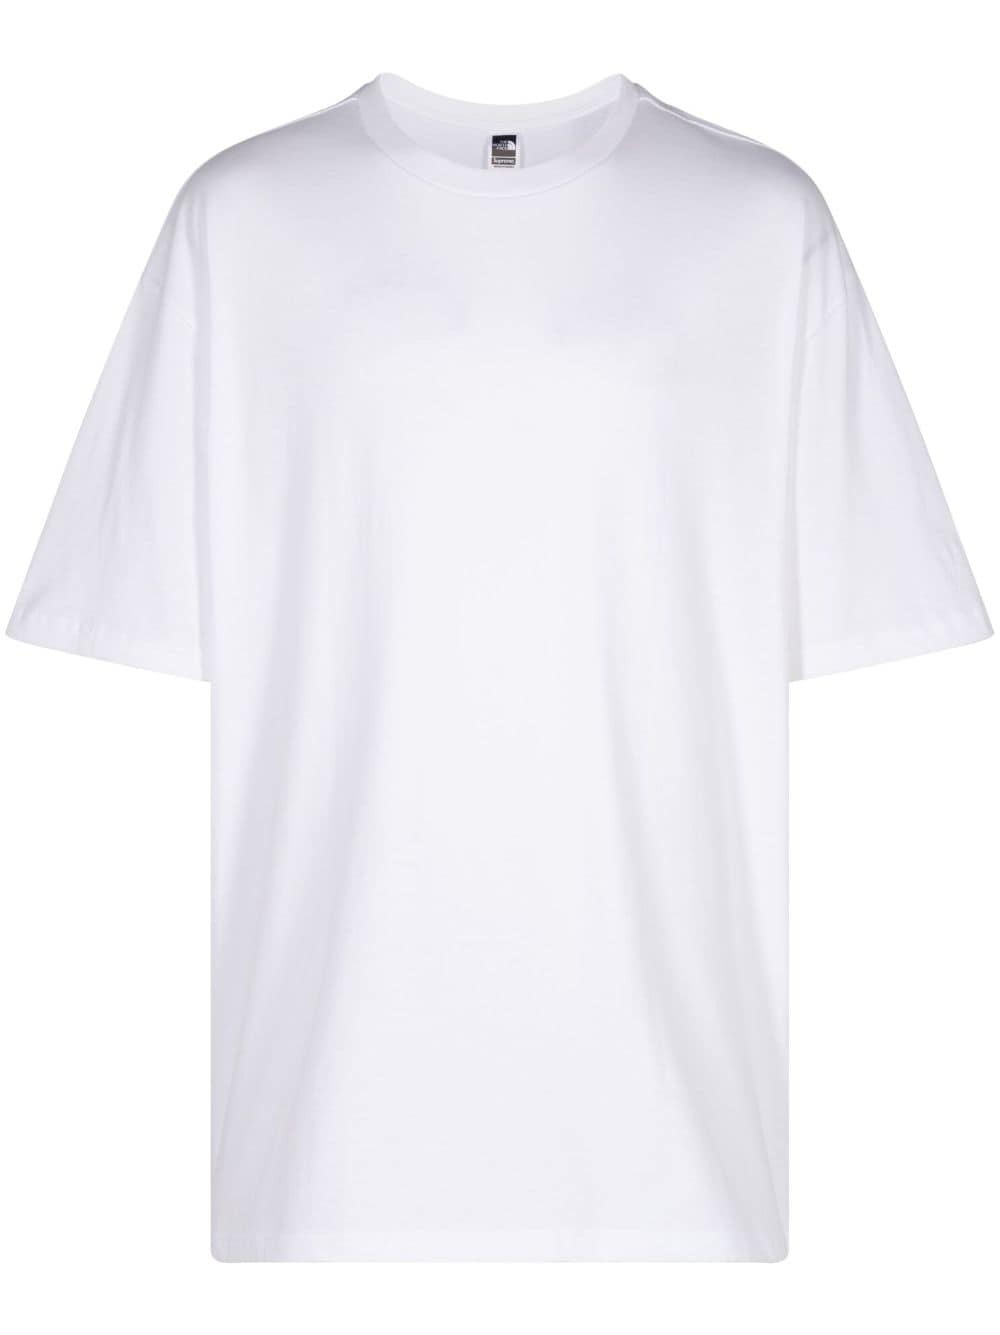 x The North Face "White" T-shirt - 1